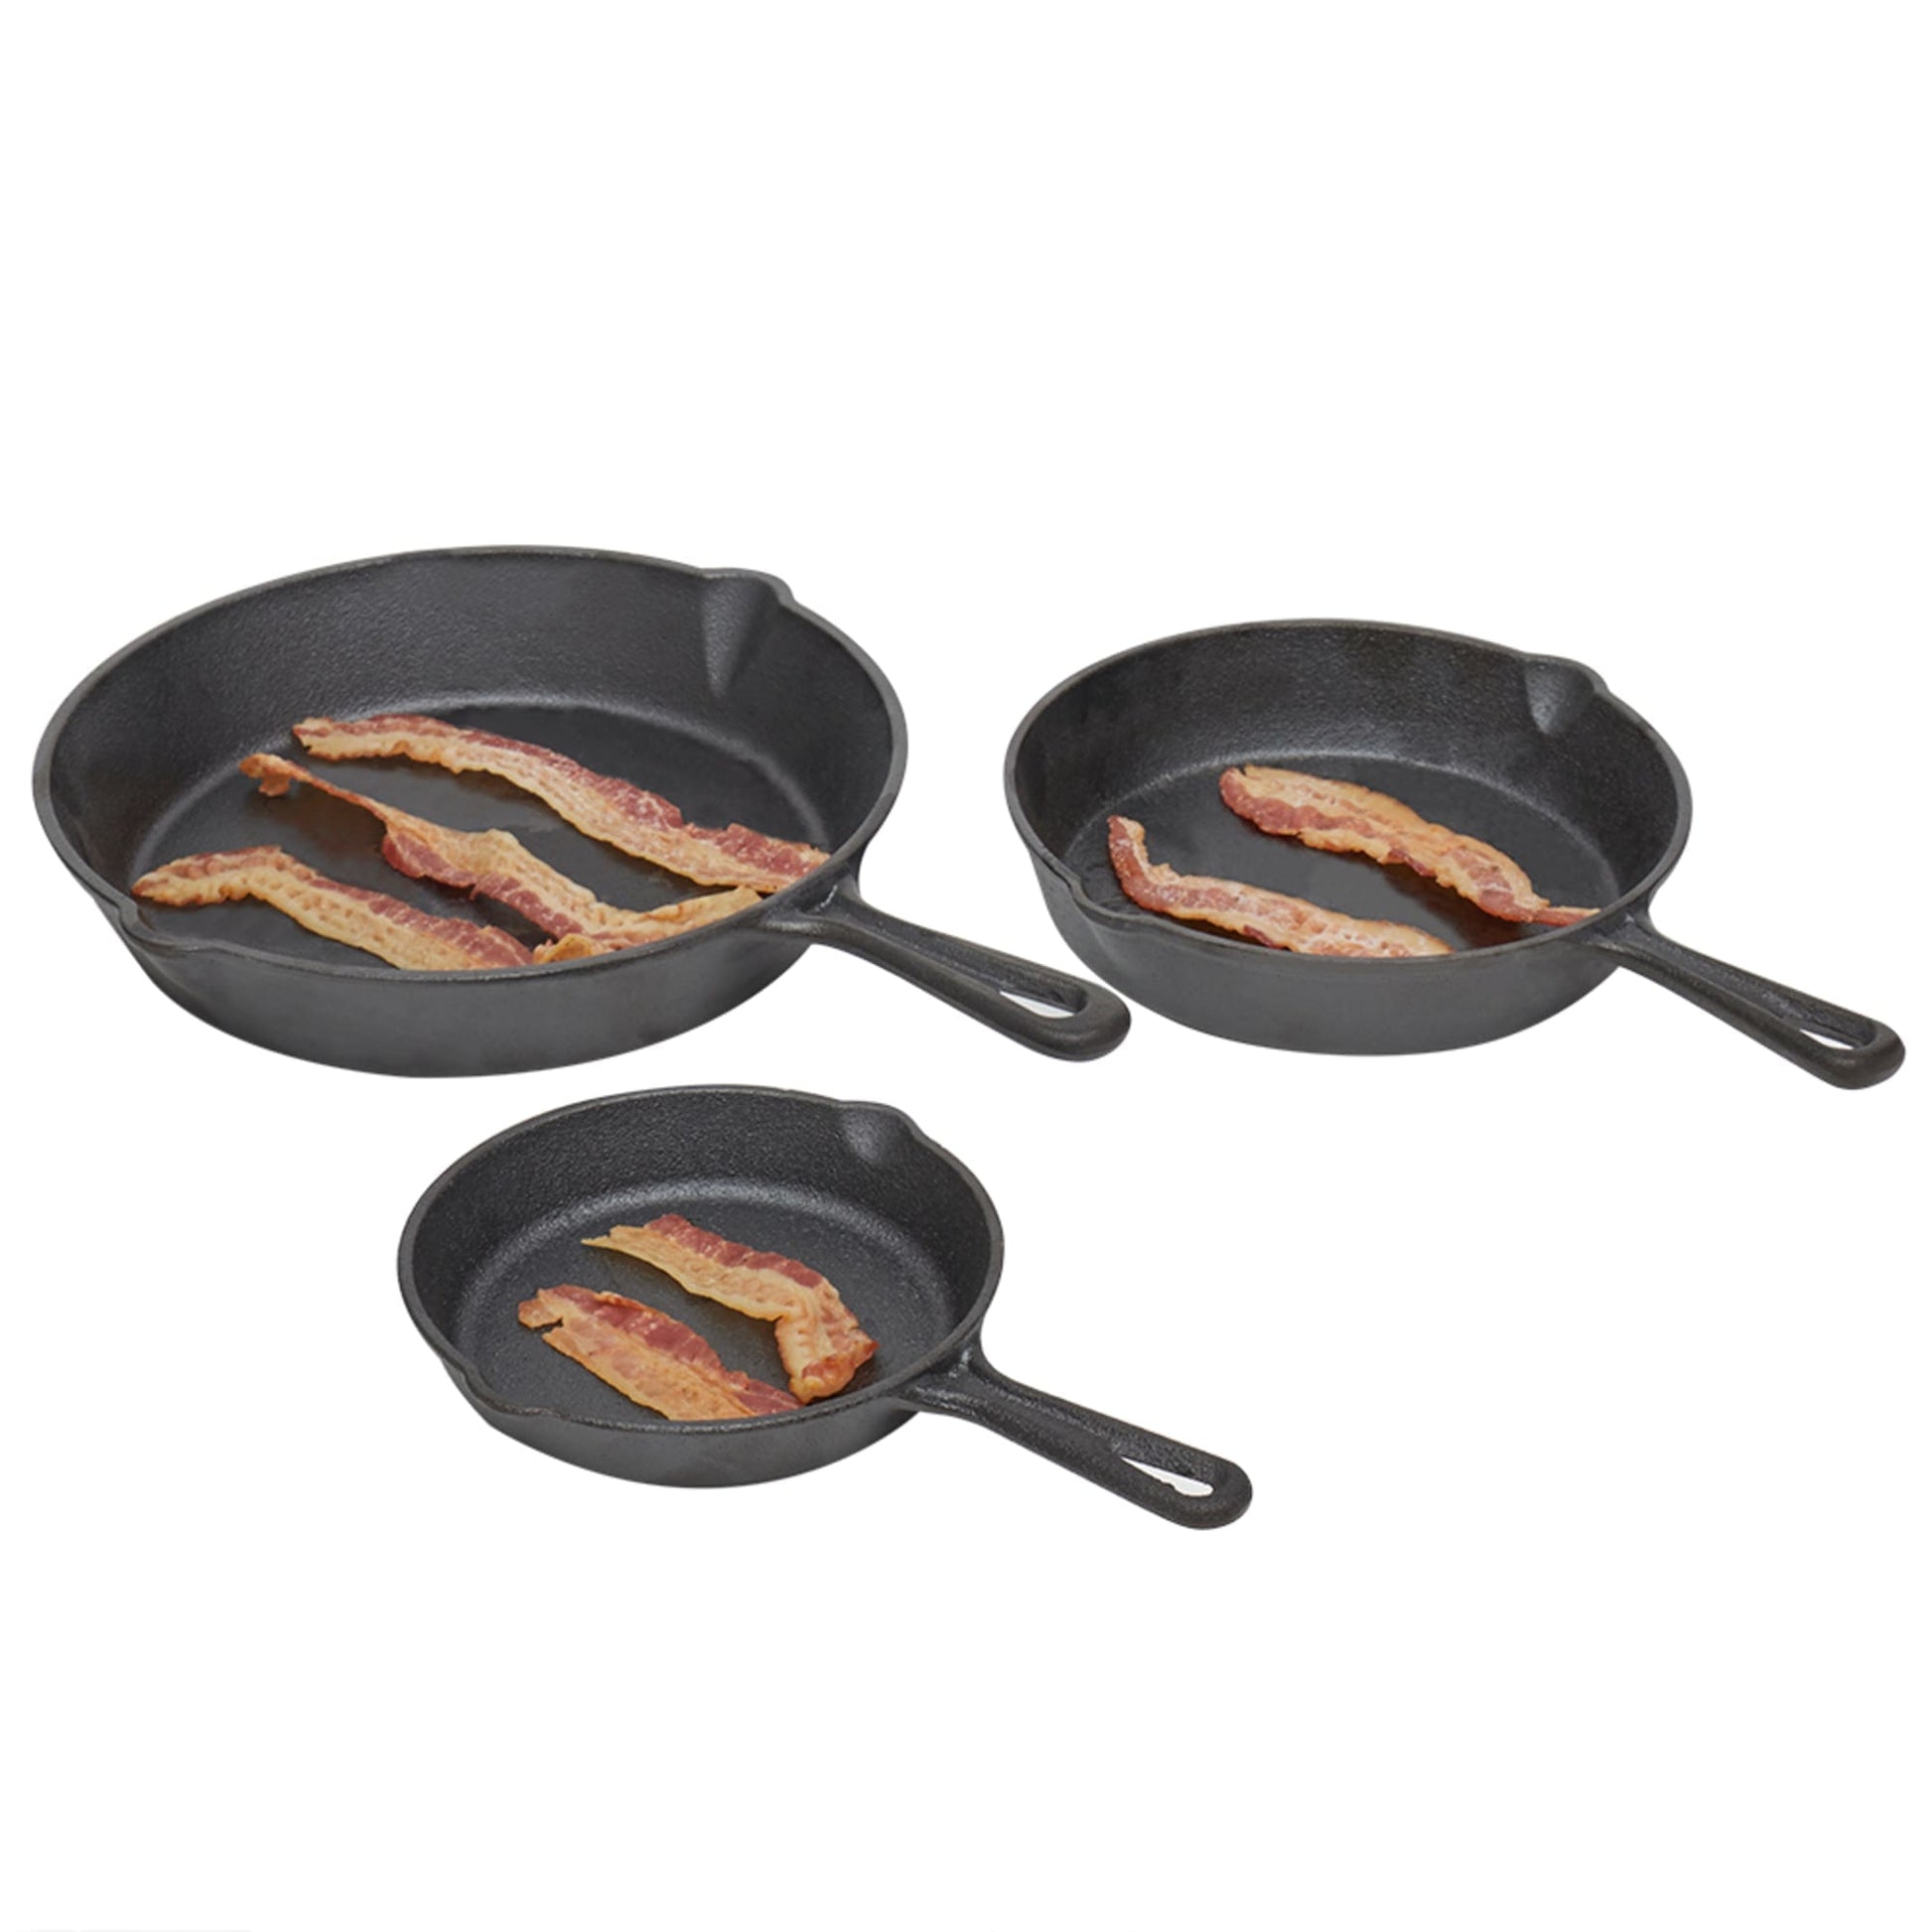 NewHome 3pcs Pre-Seasoned Cast Iron Skillet Set, 6/8/10in Non-Stick Oven Safe Cookware Heat-Resistant Frying Pan, Size: Small Product 24.5x15.5x3cm/